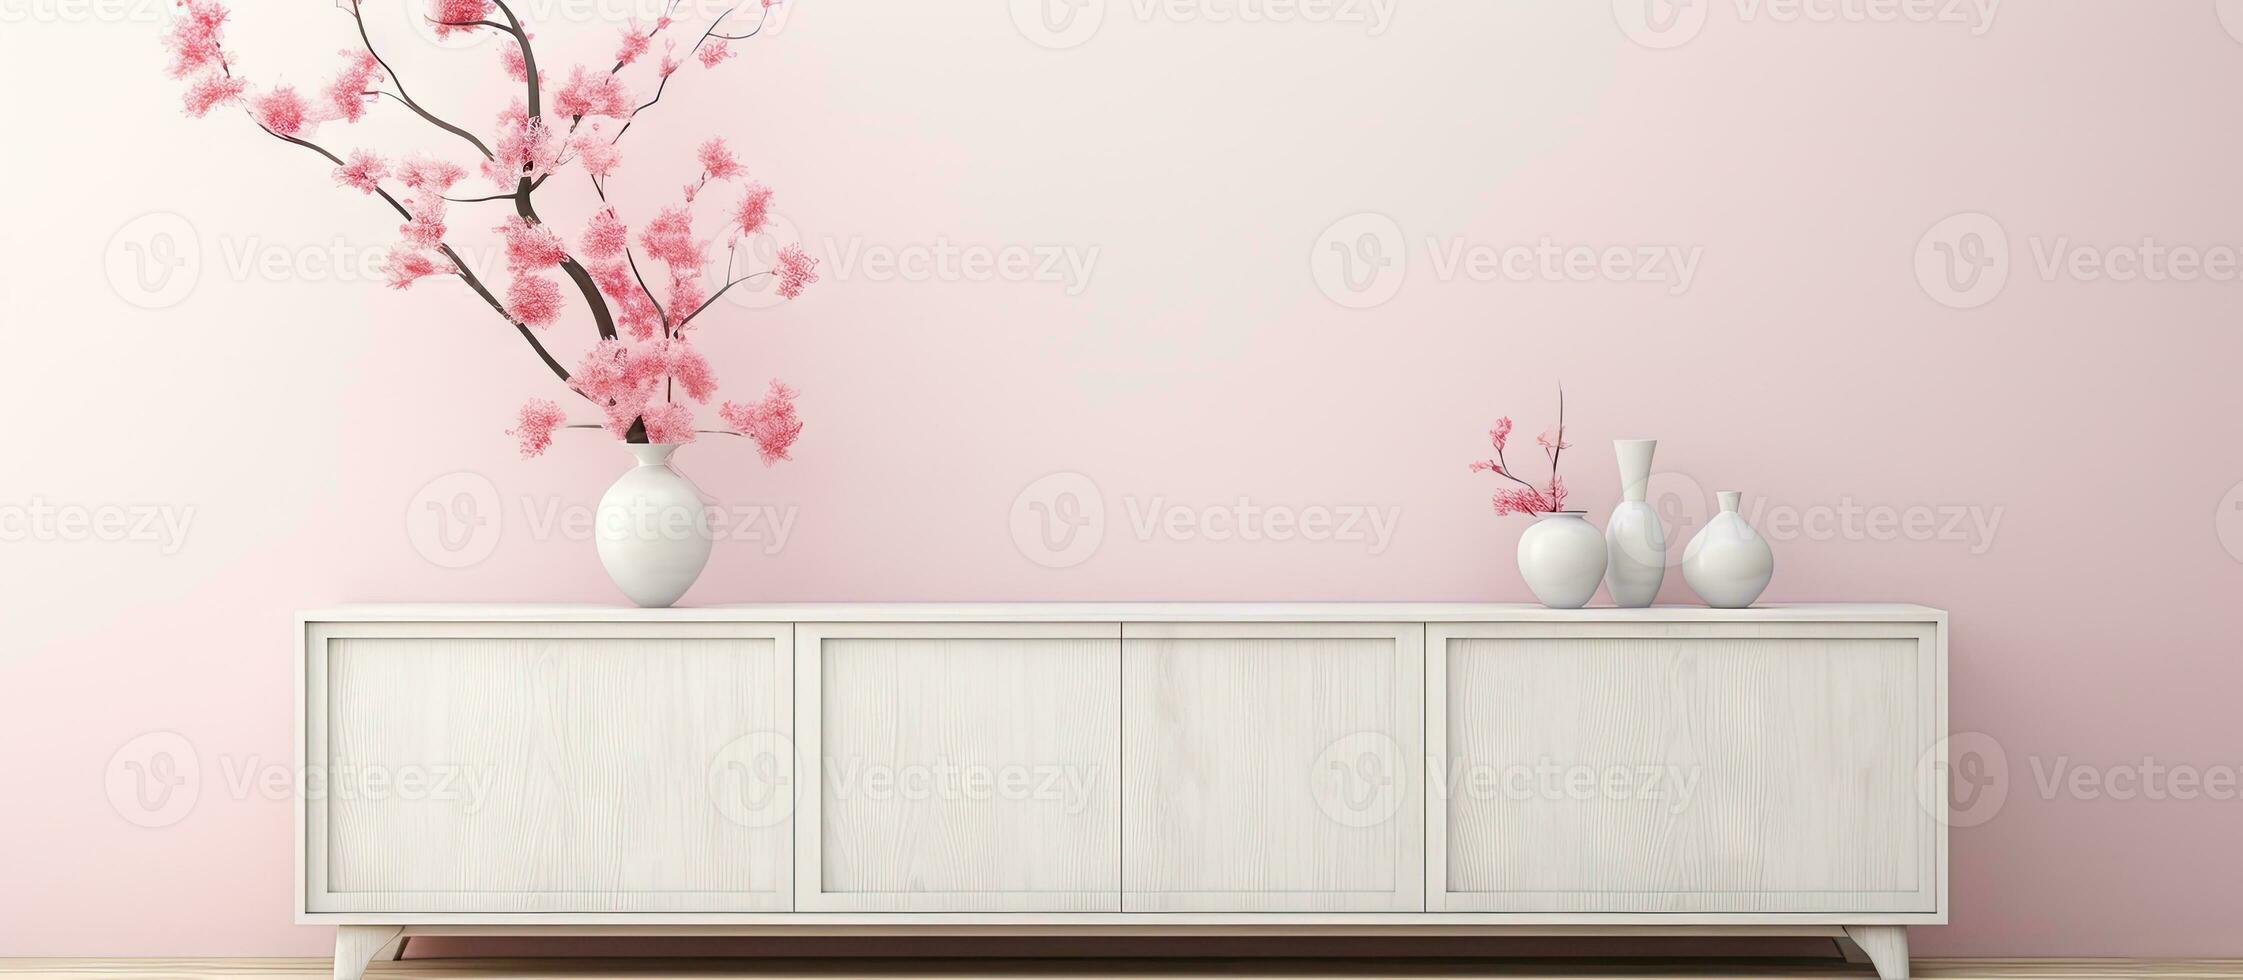 of a sideboard with home accessories on a white background allowing for wallpaper wall panels photo prints or paintings